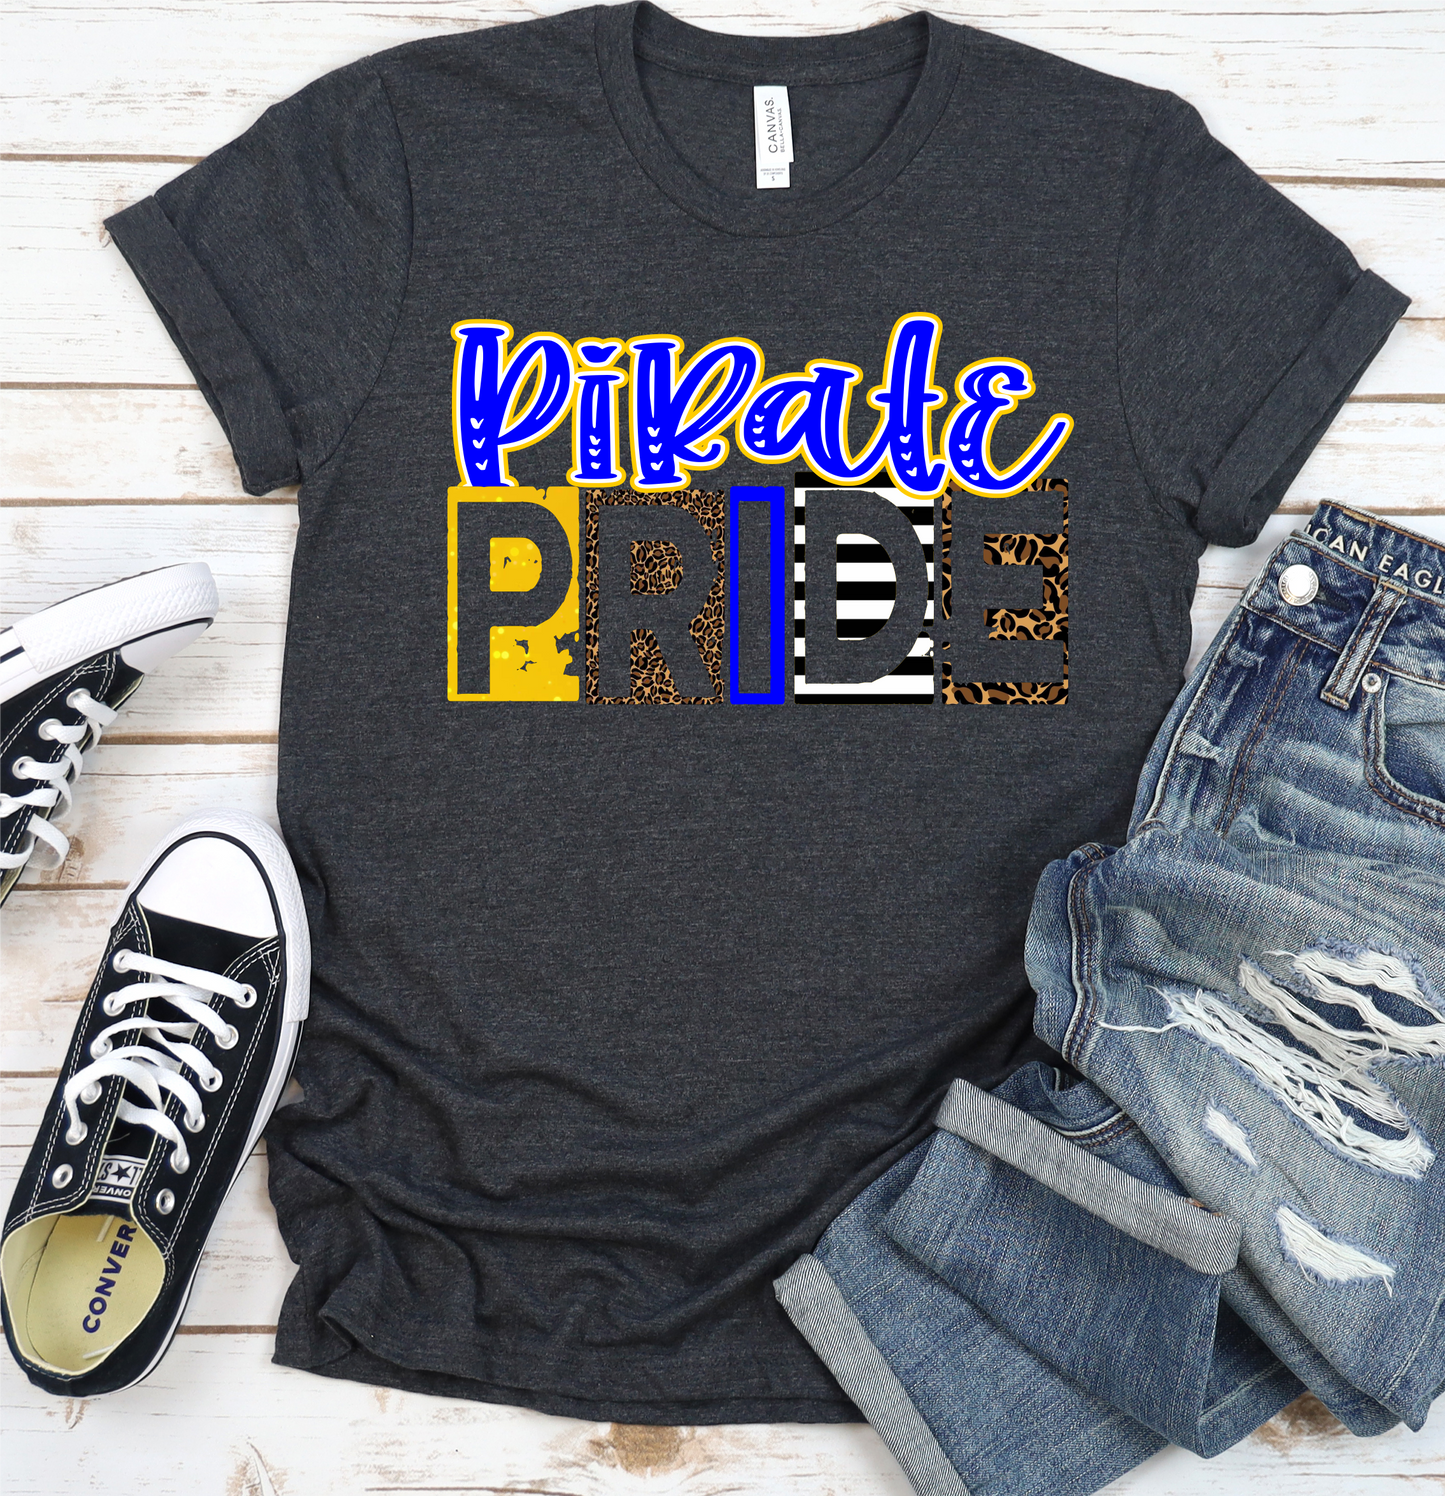 Pirate pride royal blue gold yellow team sport DTF TRANSFERSPRINT TO ORDER